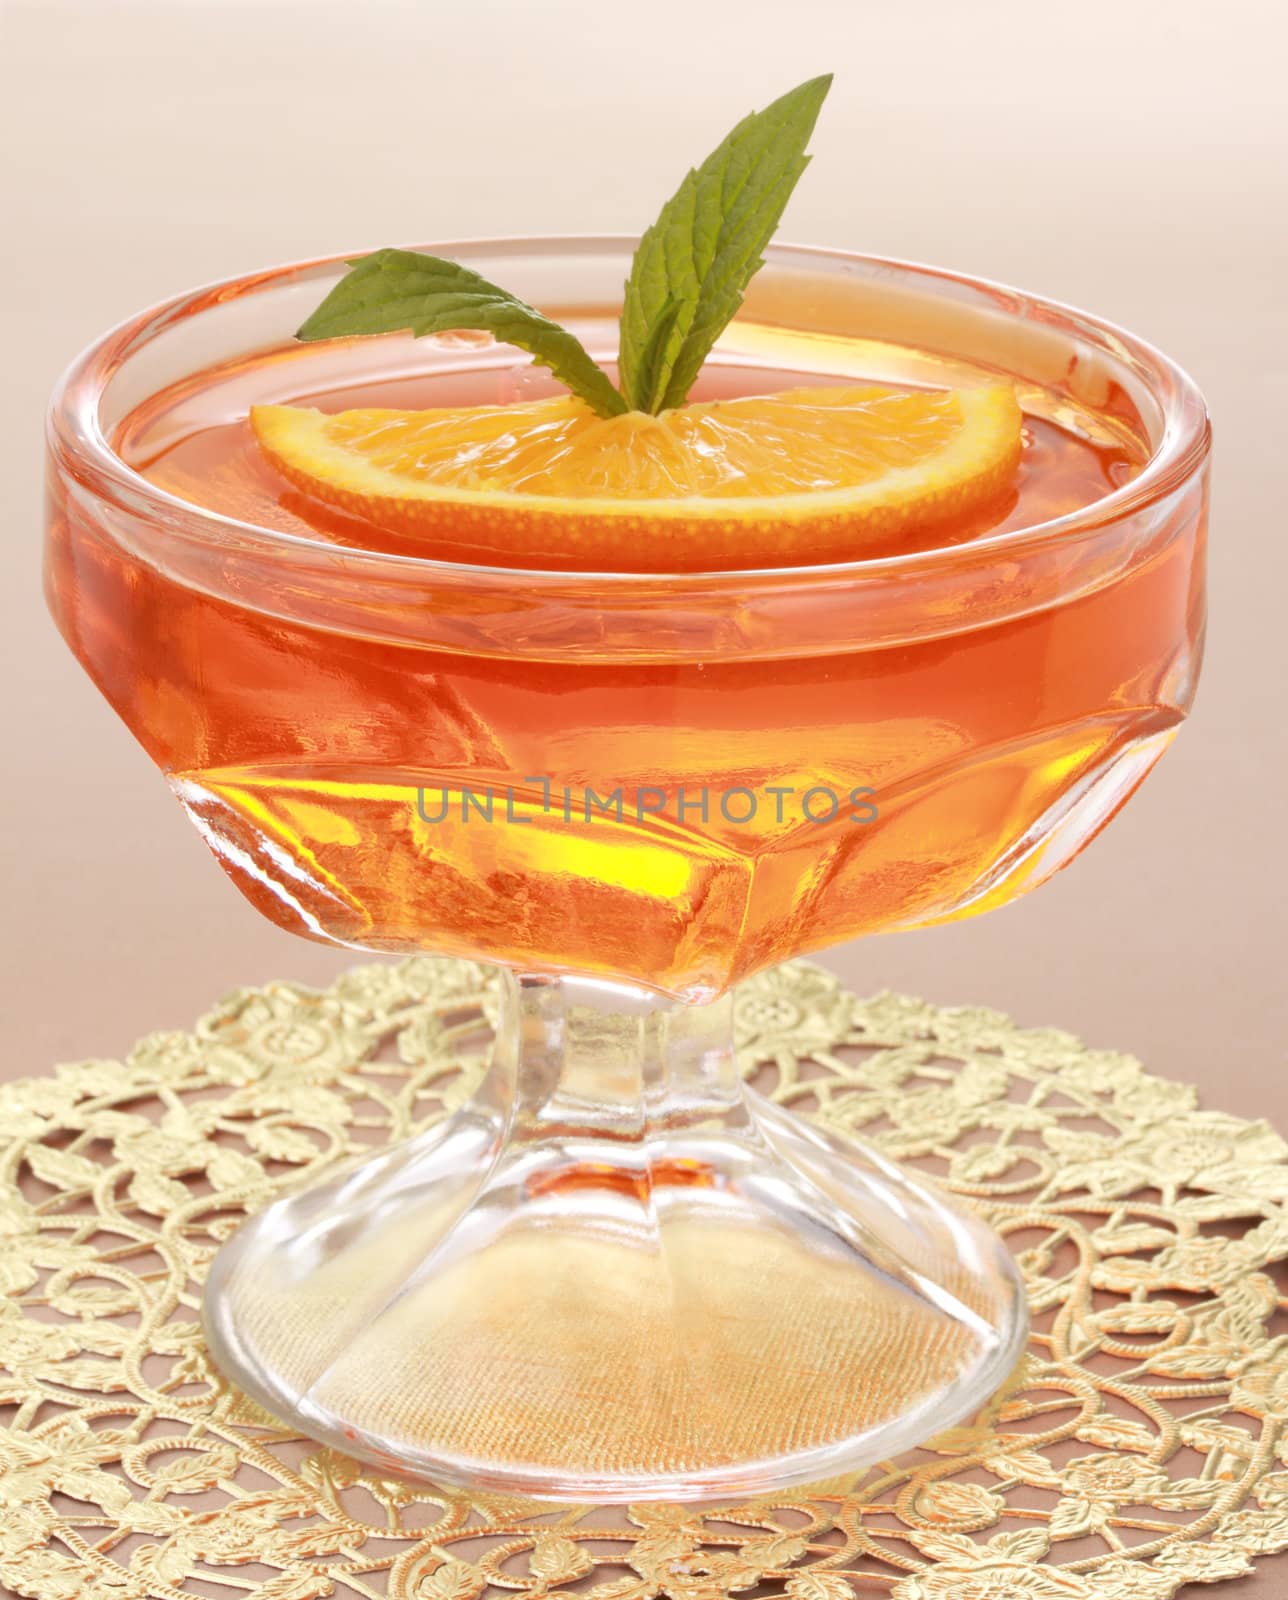 orange jelly dessert with leaves of mint